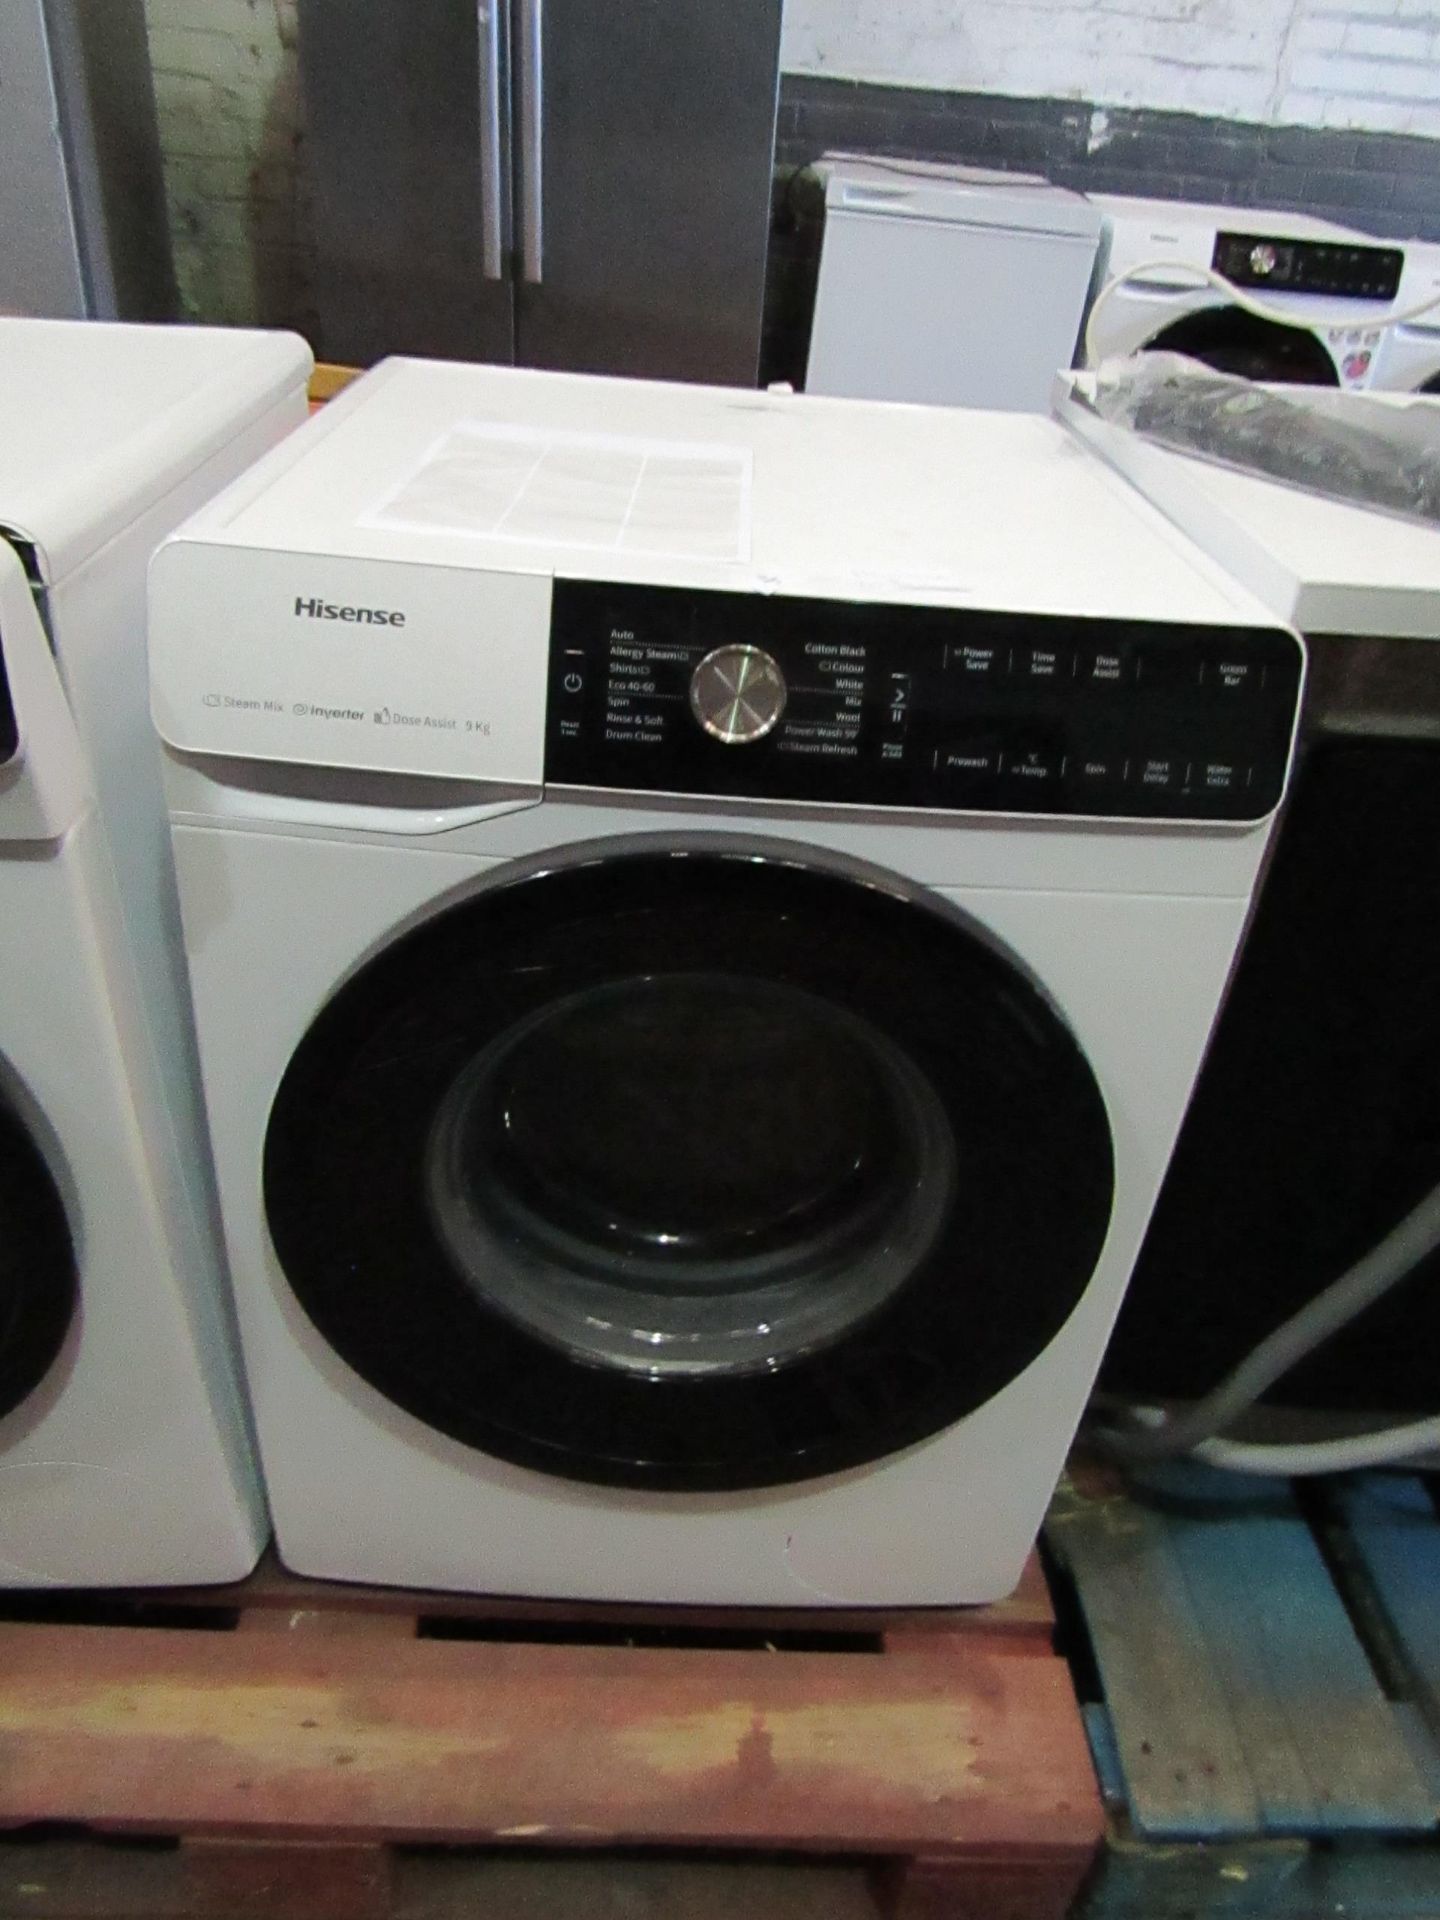 hisense 9kg washing machine, powers ona dn spins but we havent connected it to water to check any